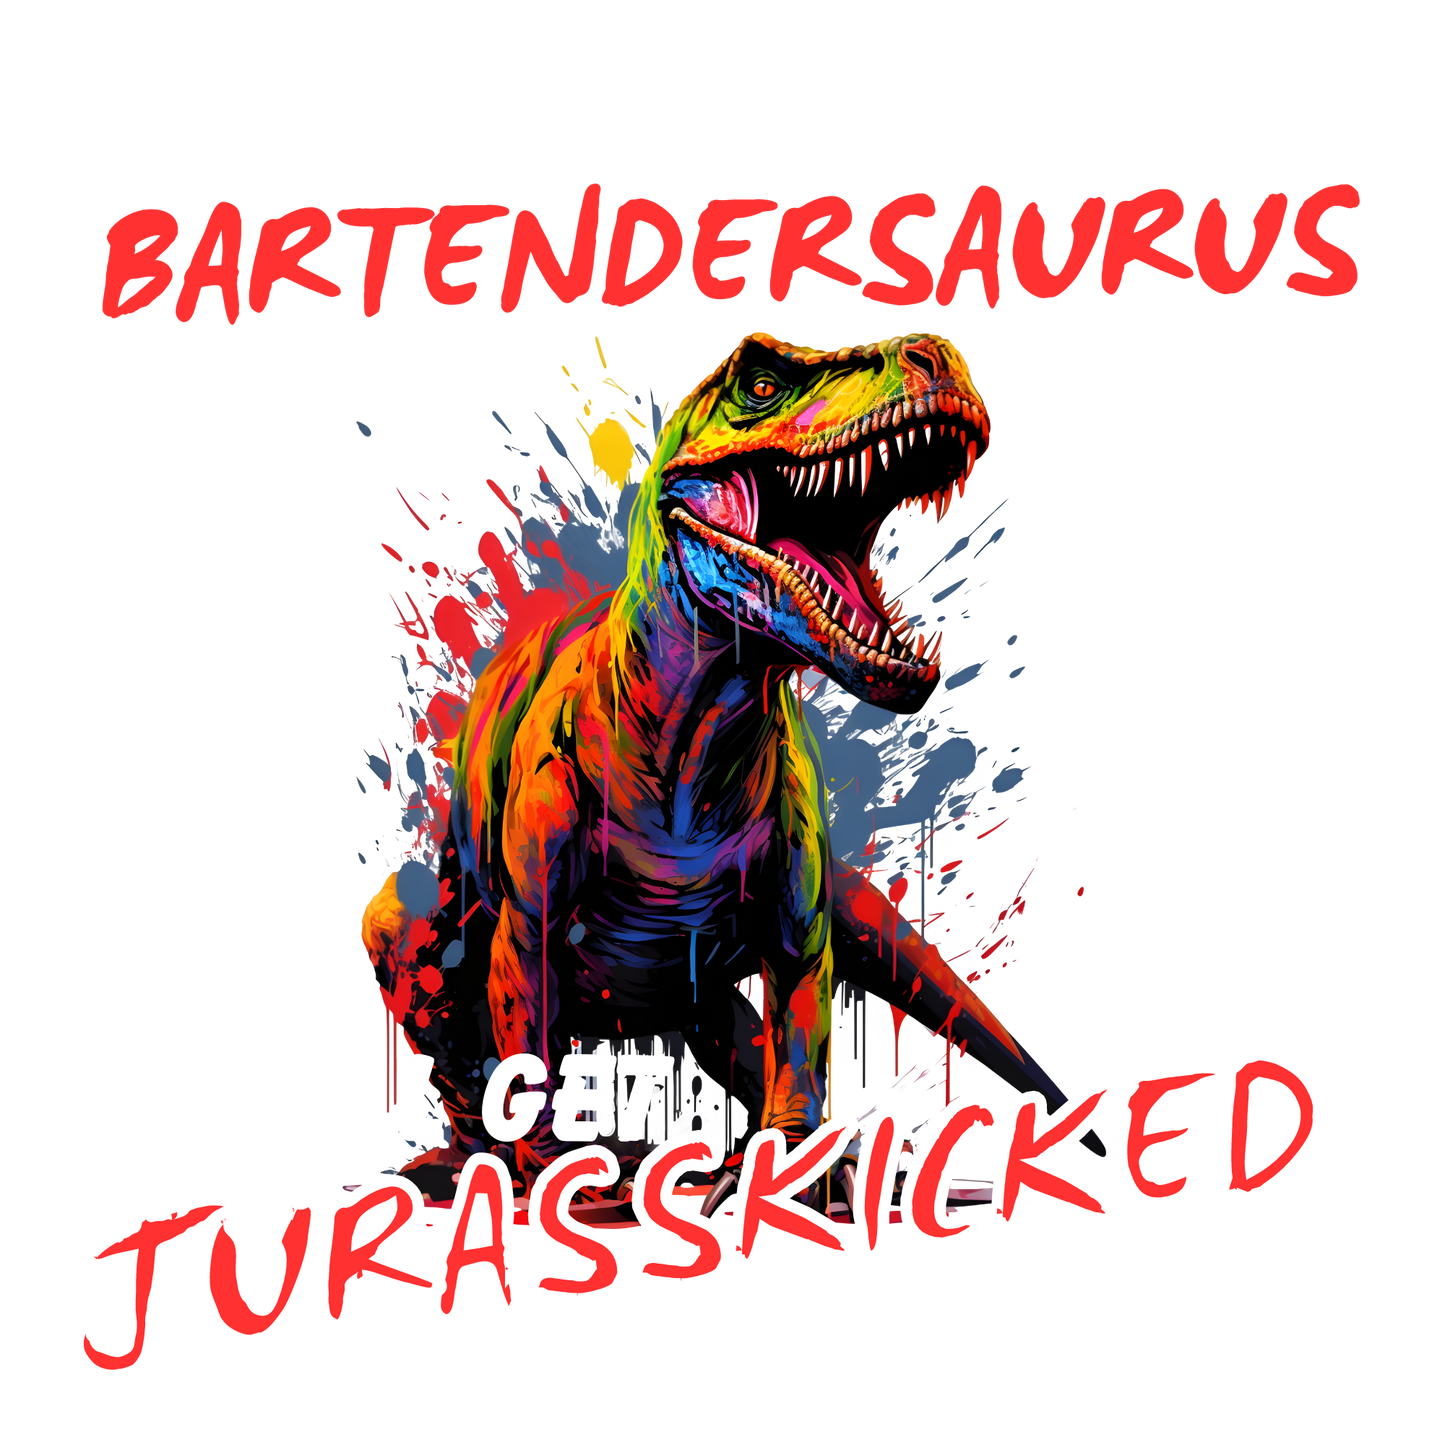 Don't Mess With Bartendersaurus You'll Get Jurasskicked